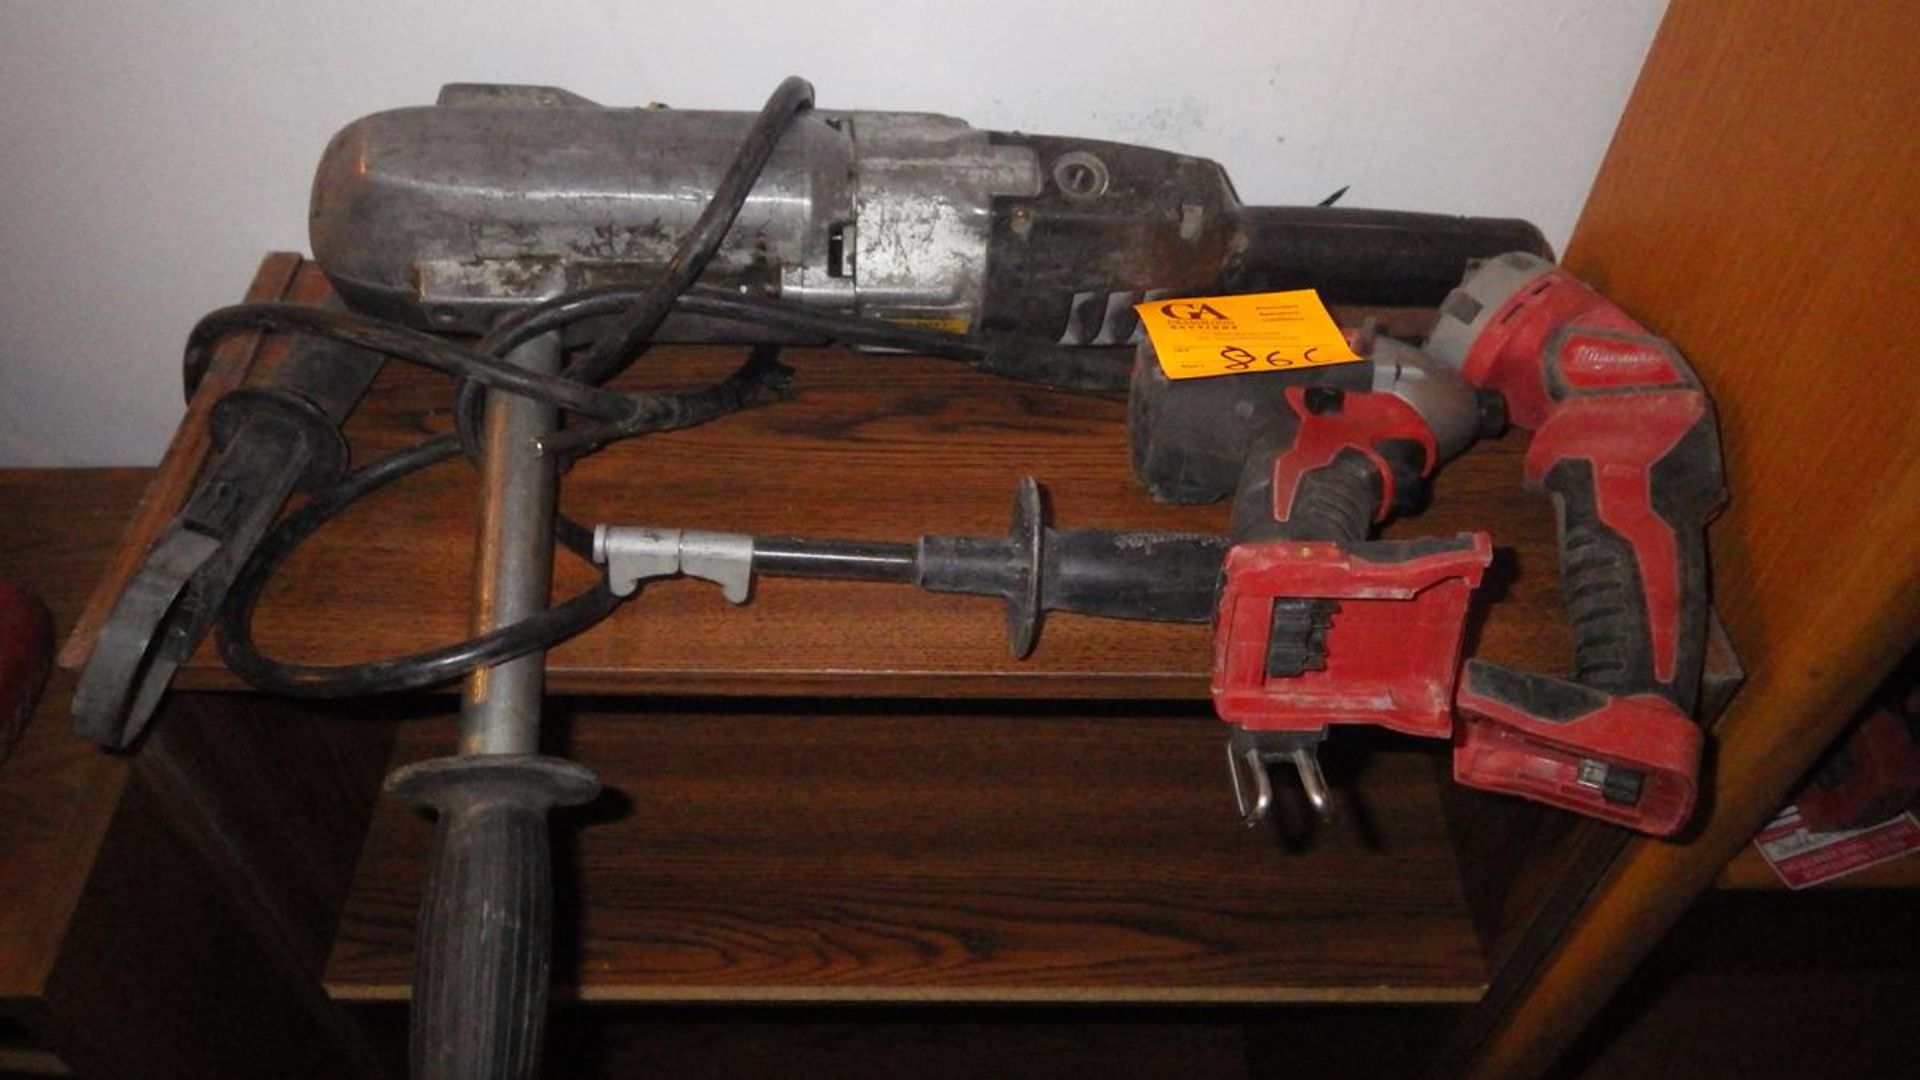 One electric drill, one cordless Milwaukee drill, and One cordless flash light